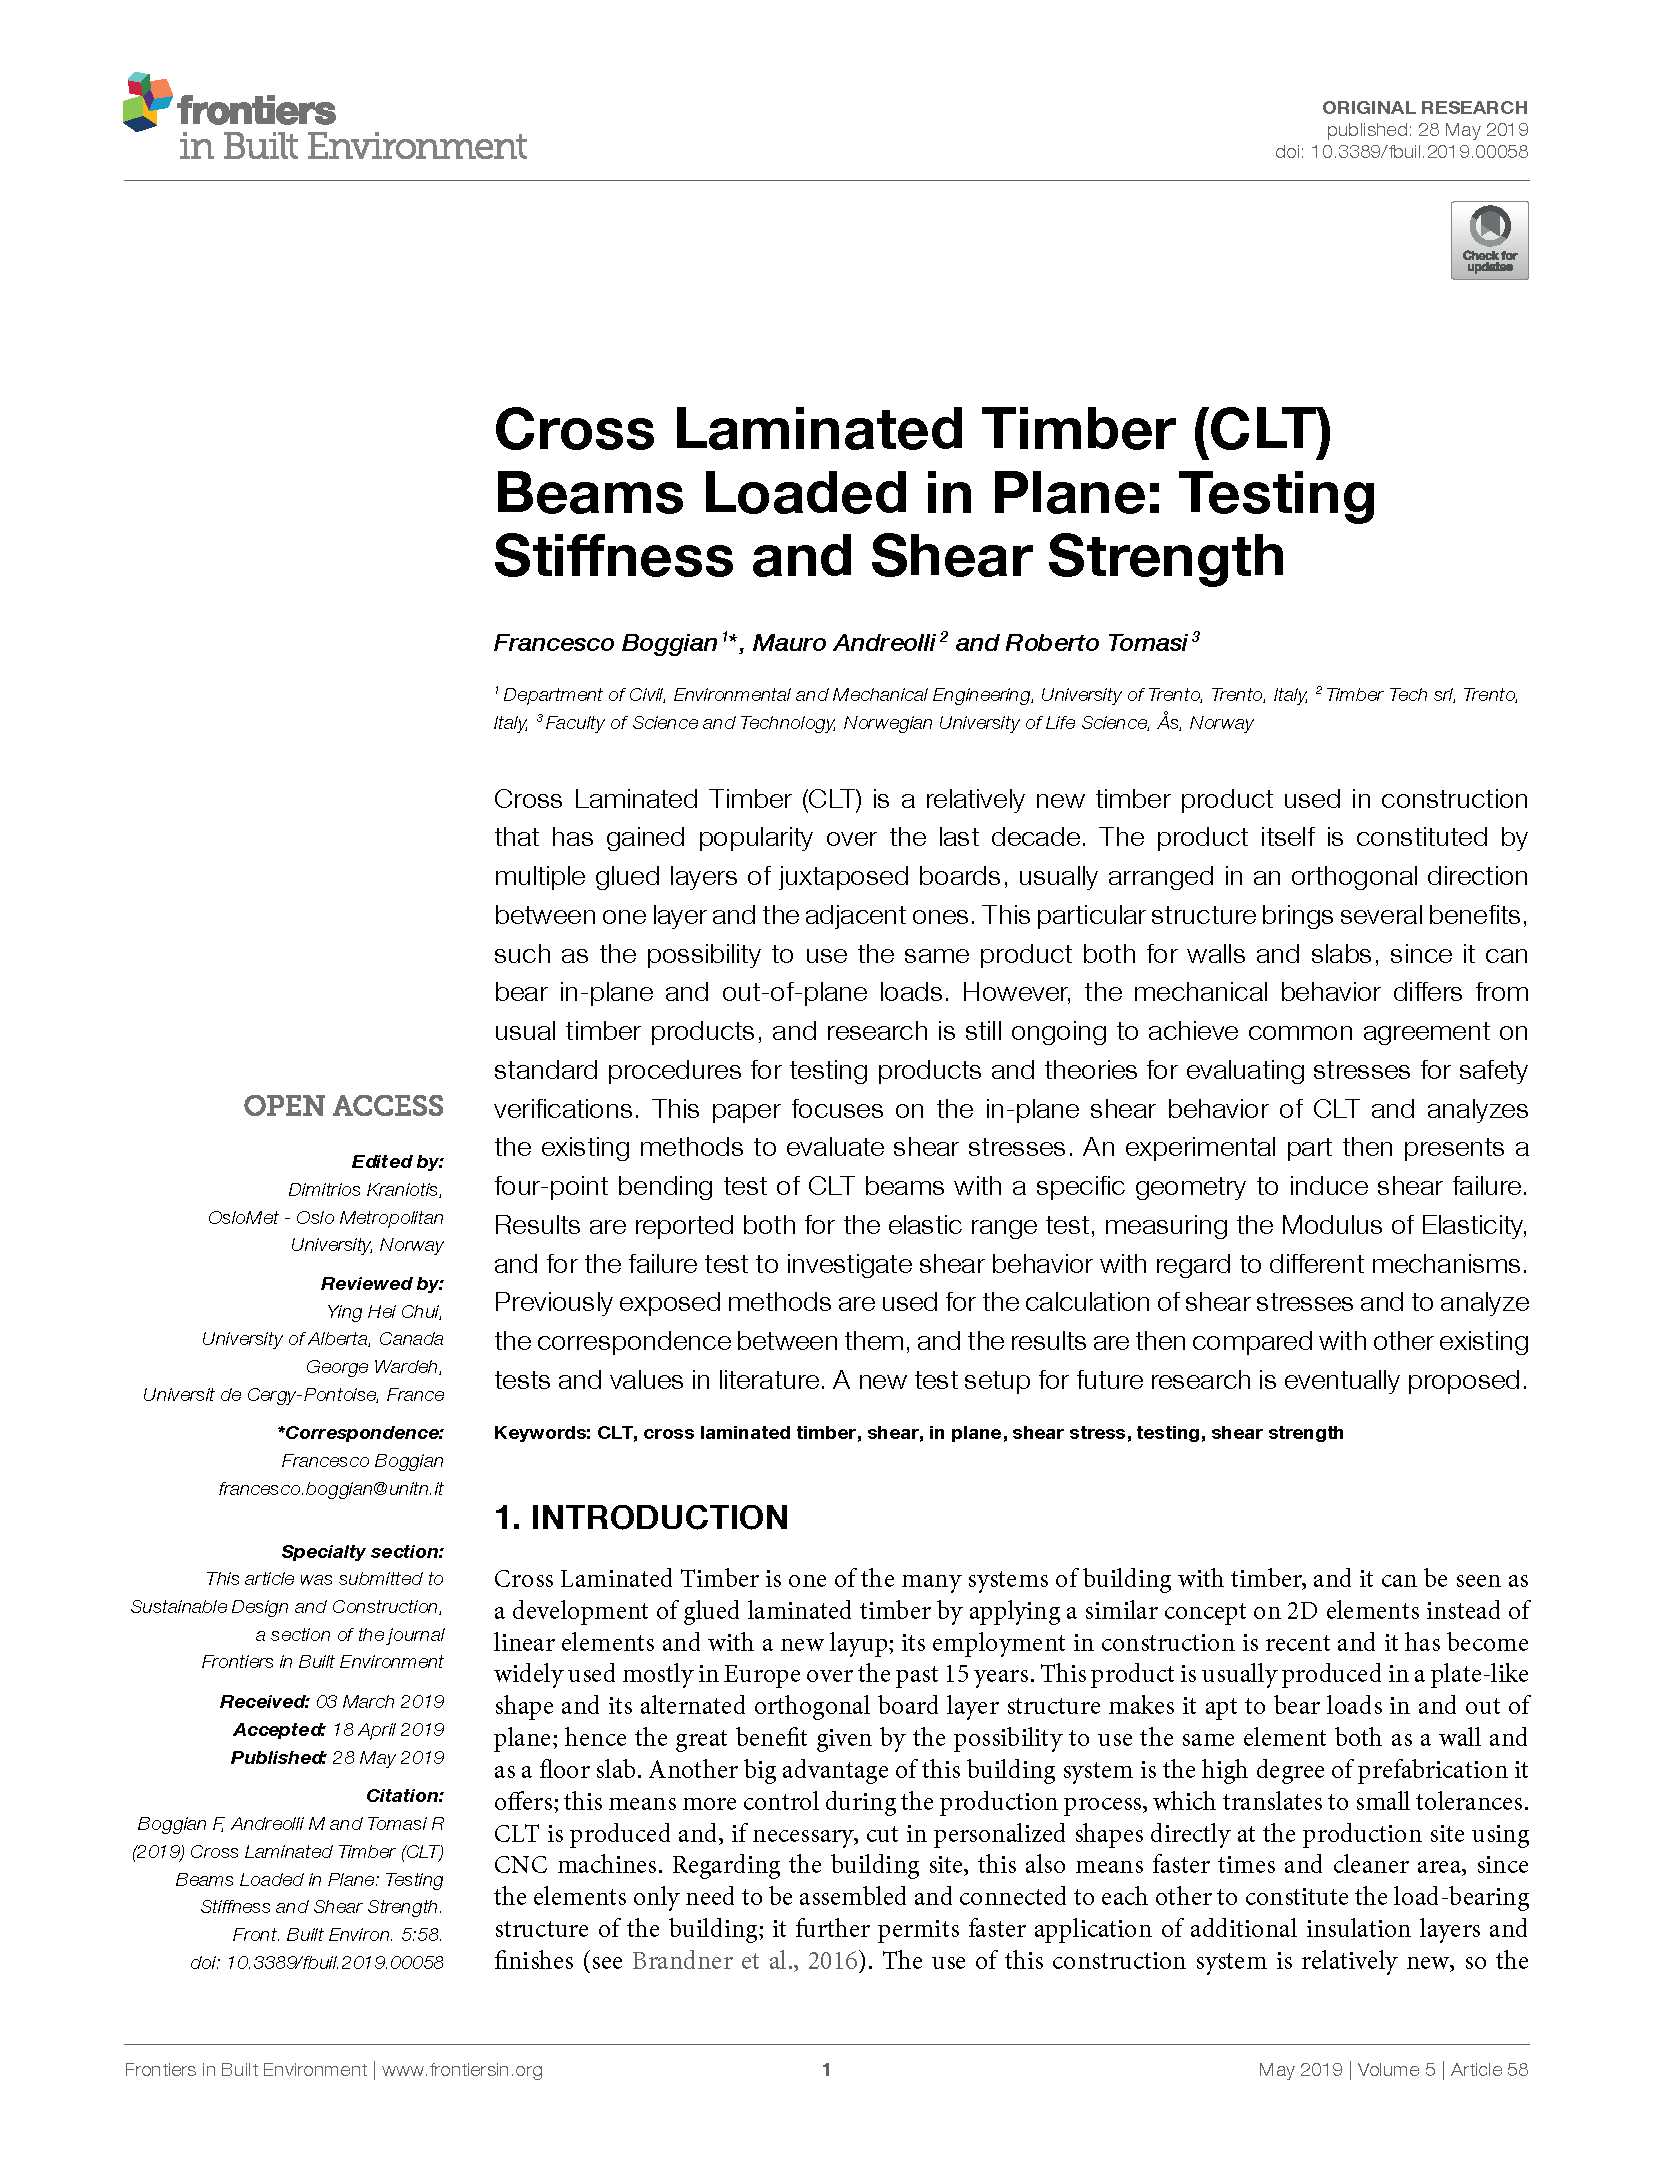 Cross Laminated Timber (CLT) Beams Loaded in Plane_ Testing Stiffness and Shear Strength